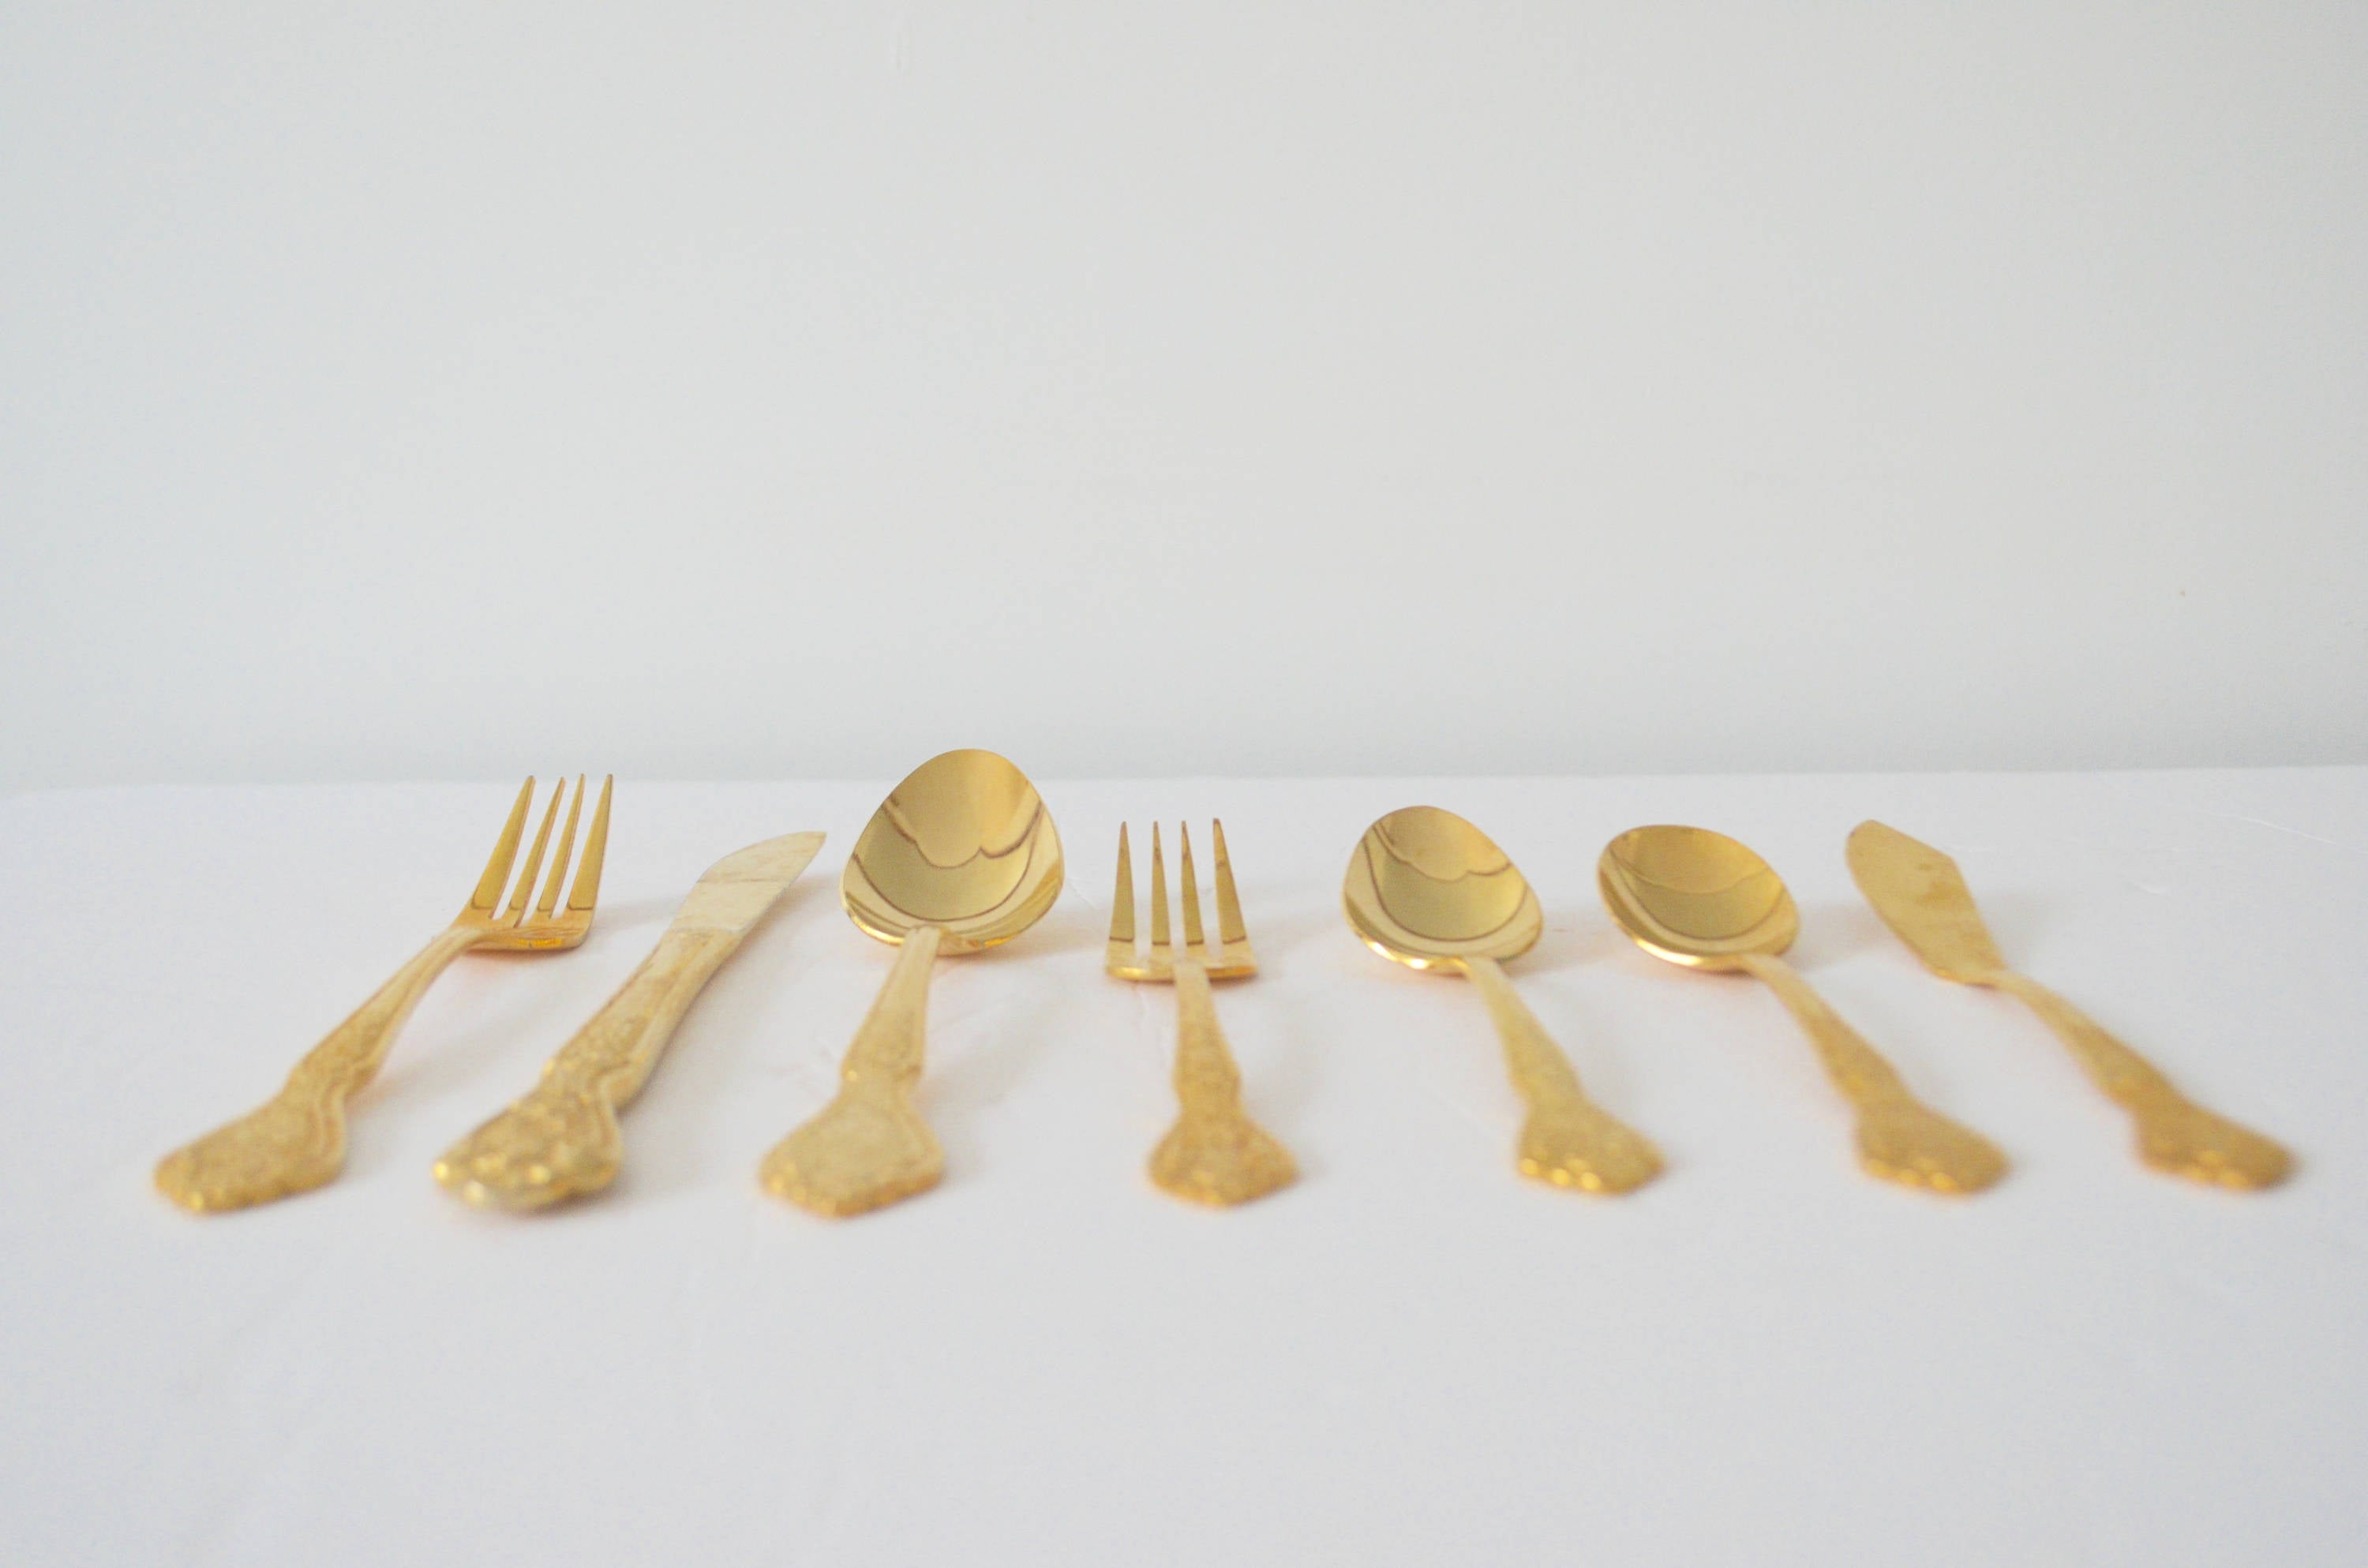 Rogers Baroque Rose Filigree 24K Gold Plated On Stainless Flatware Tableware Silverware 42 Pieces